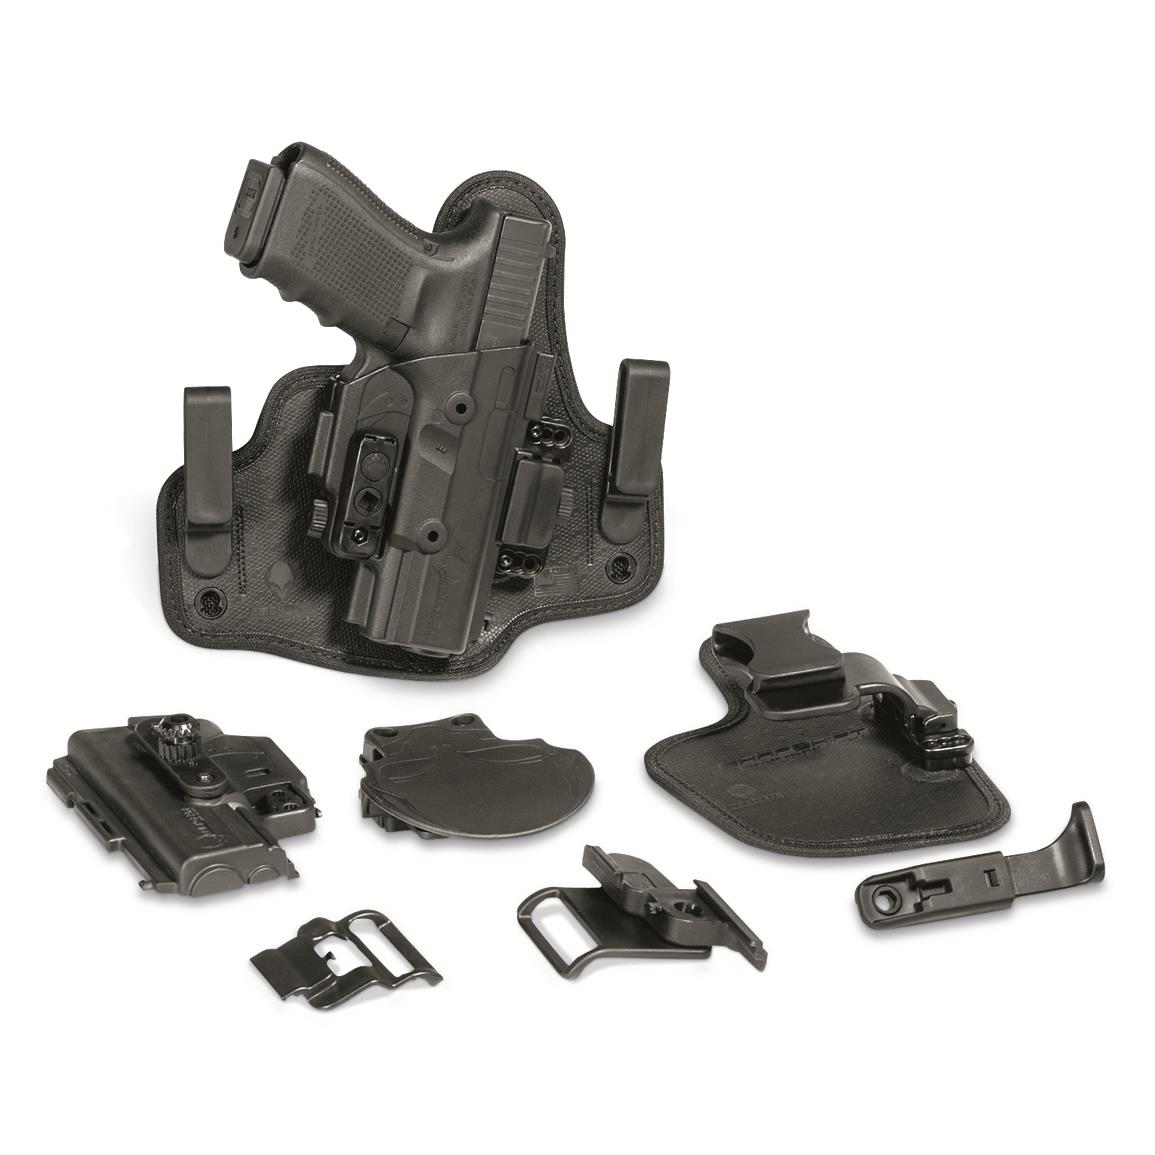 Alien Gear ShapeShift Holster Core Carry Pack, Springfield XD Sub-Compact